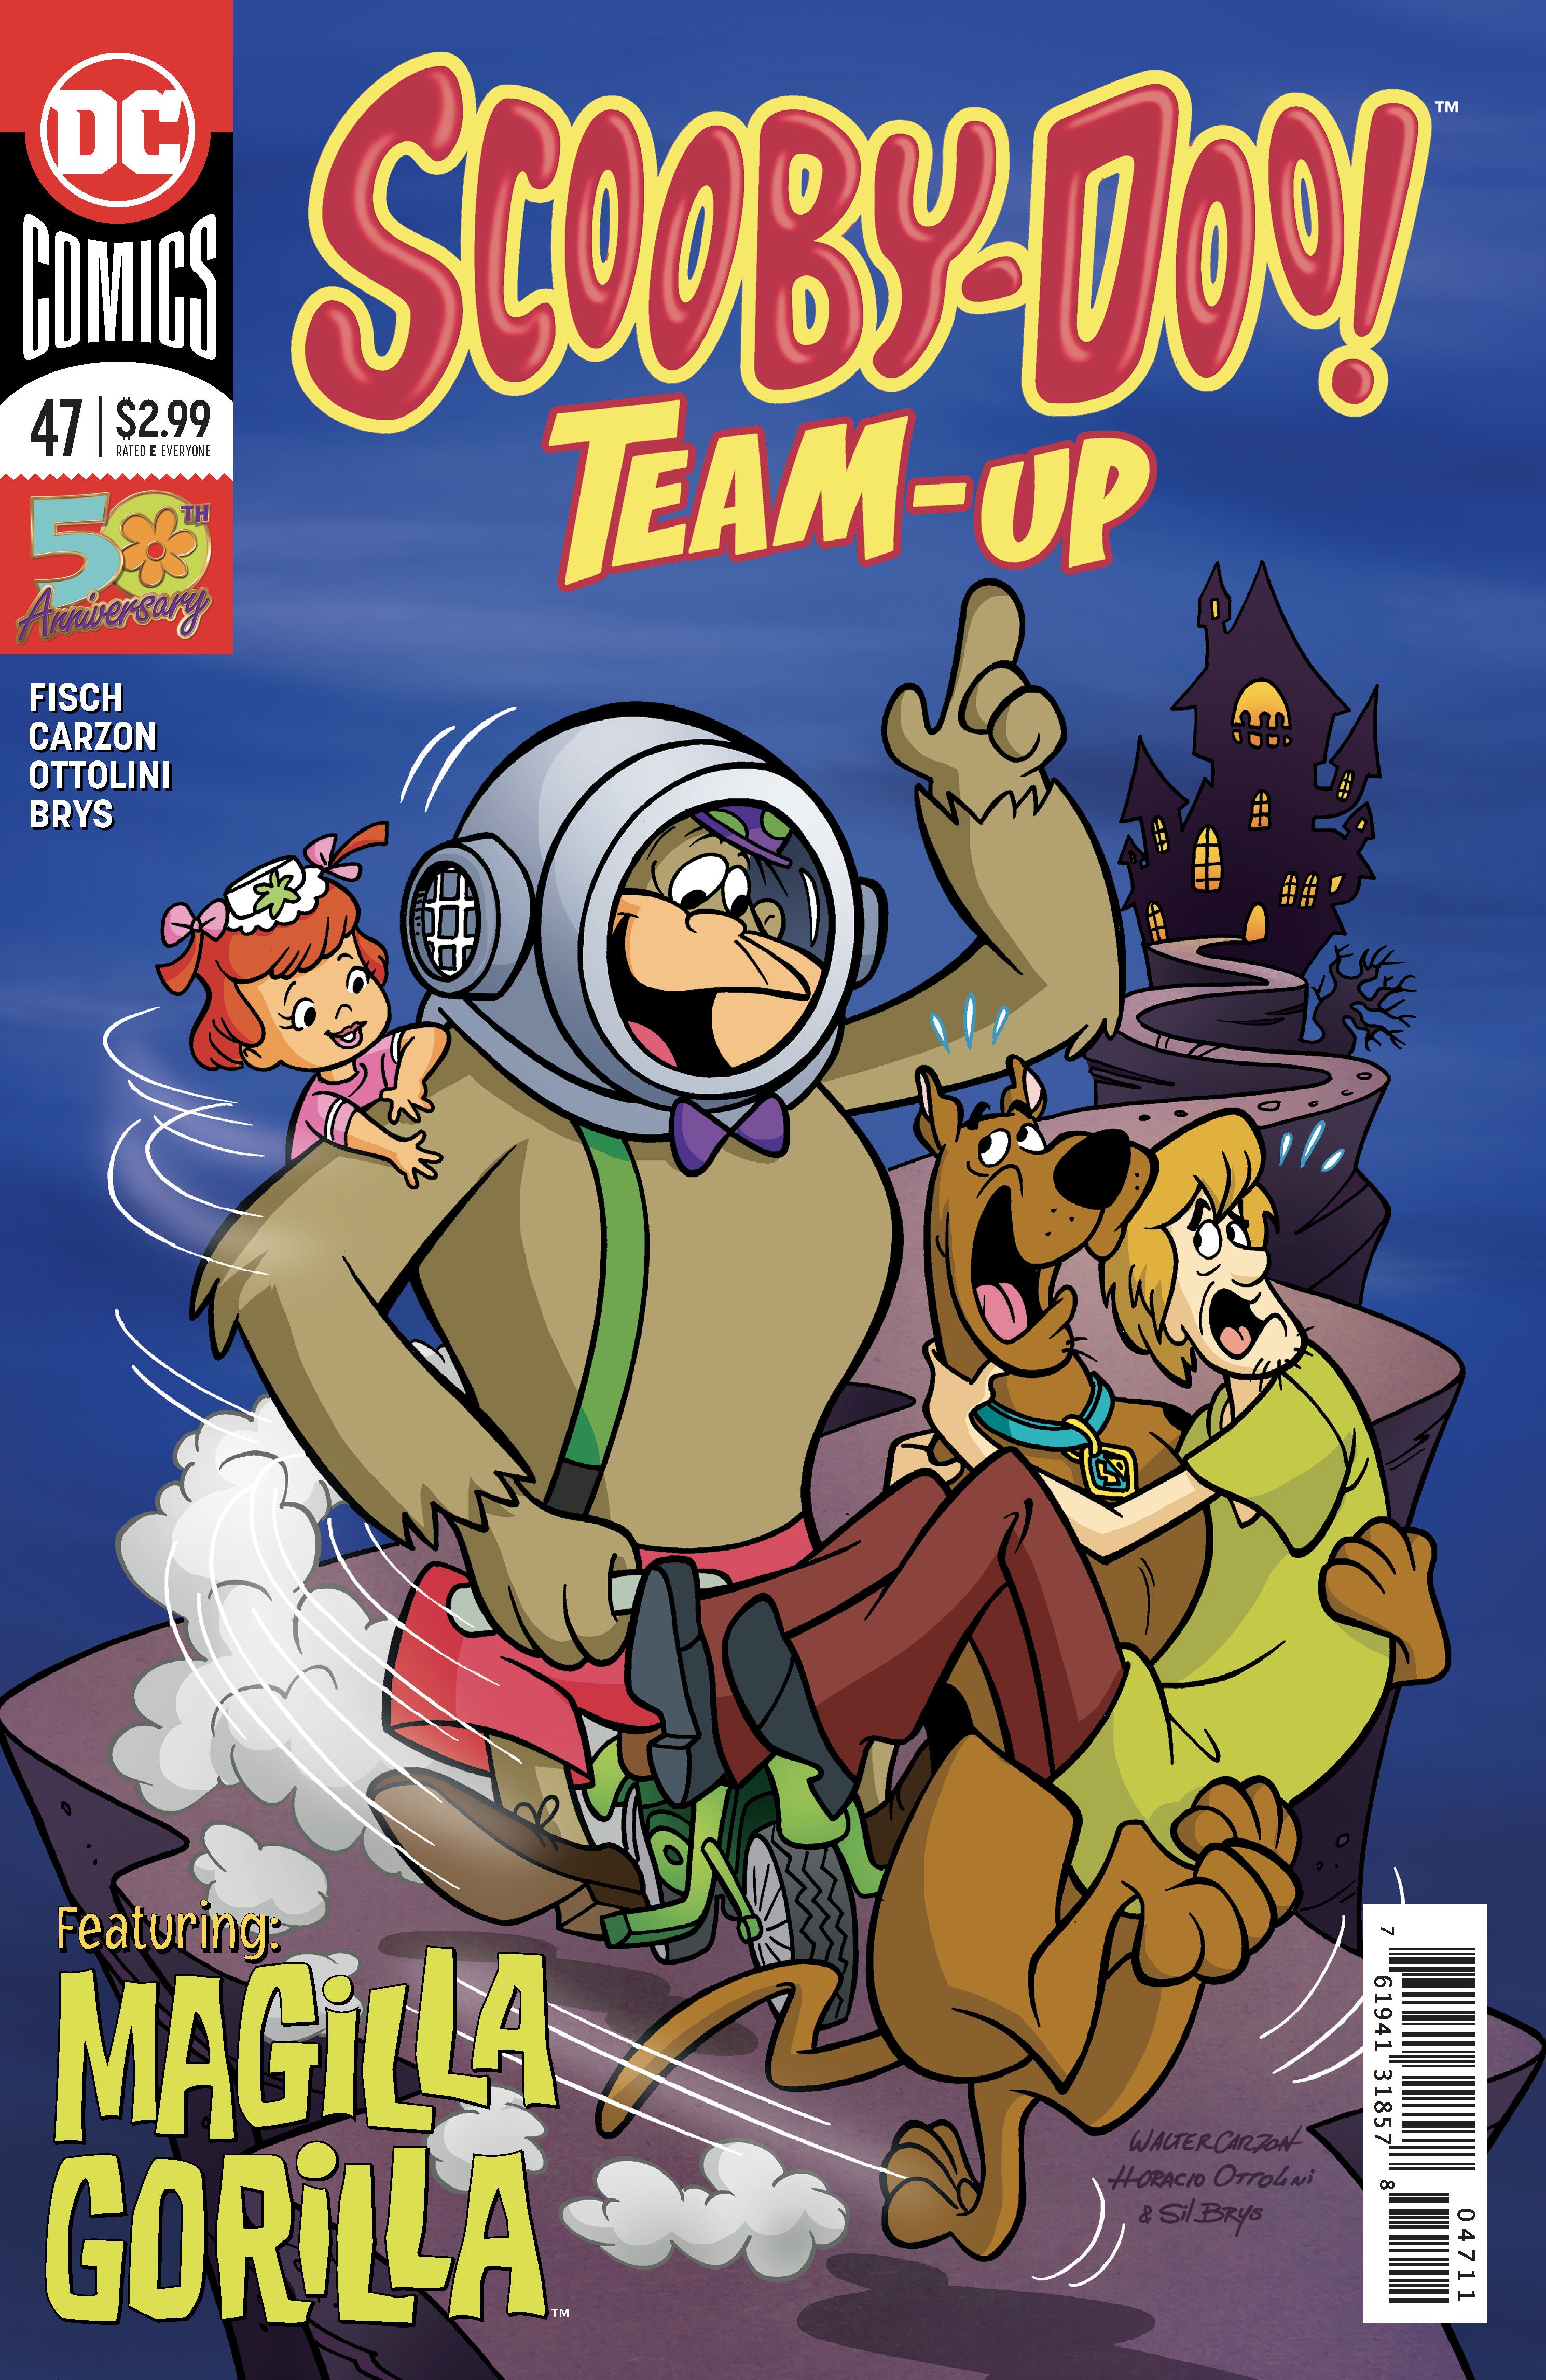 SCOOBY DOO TEAM UP #47 | Game Master's Emporium (The New GME)